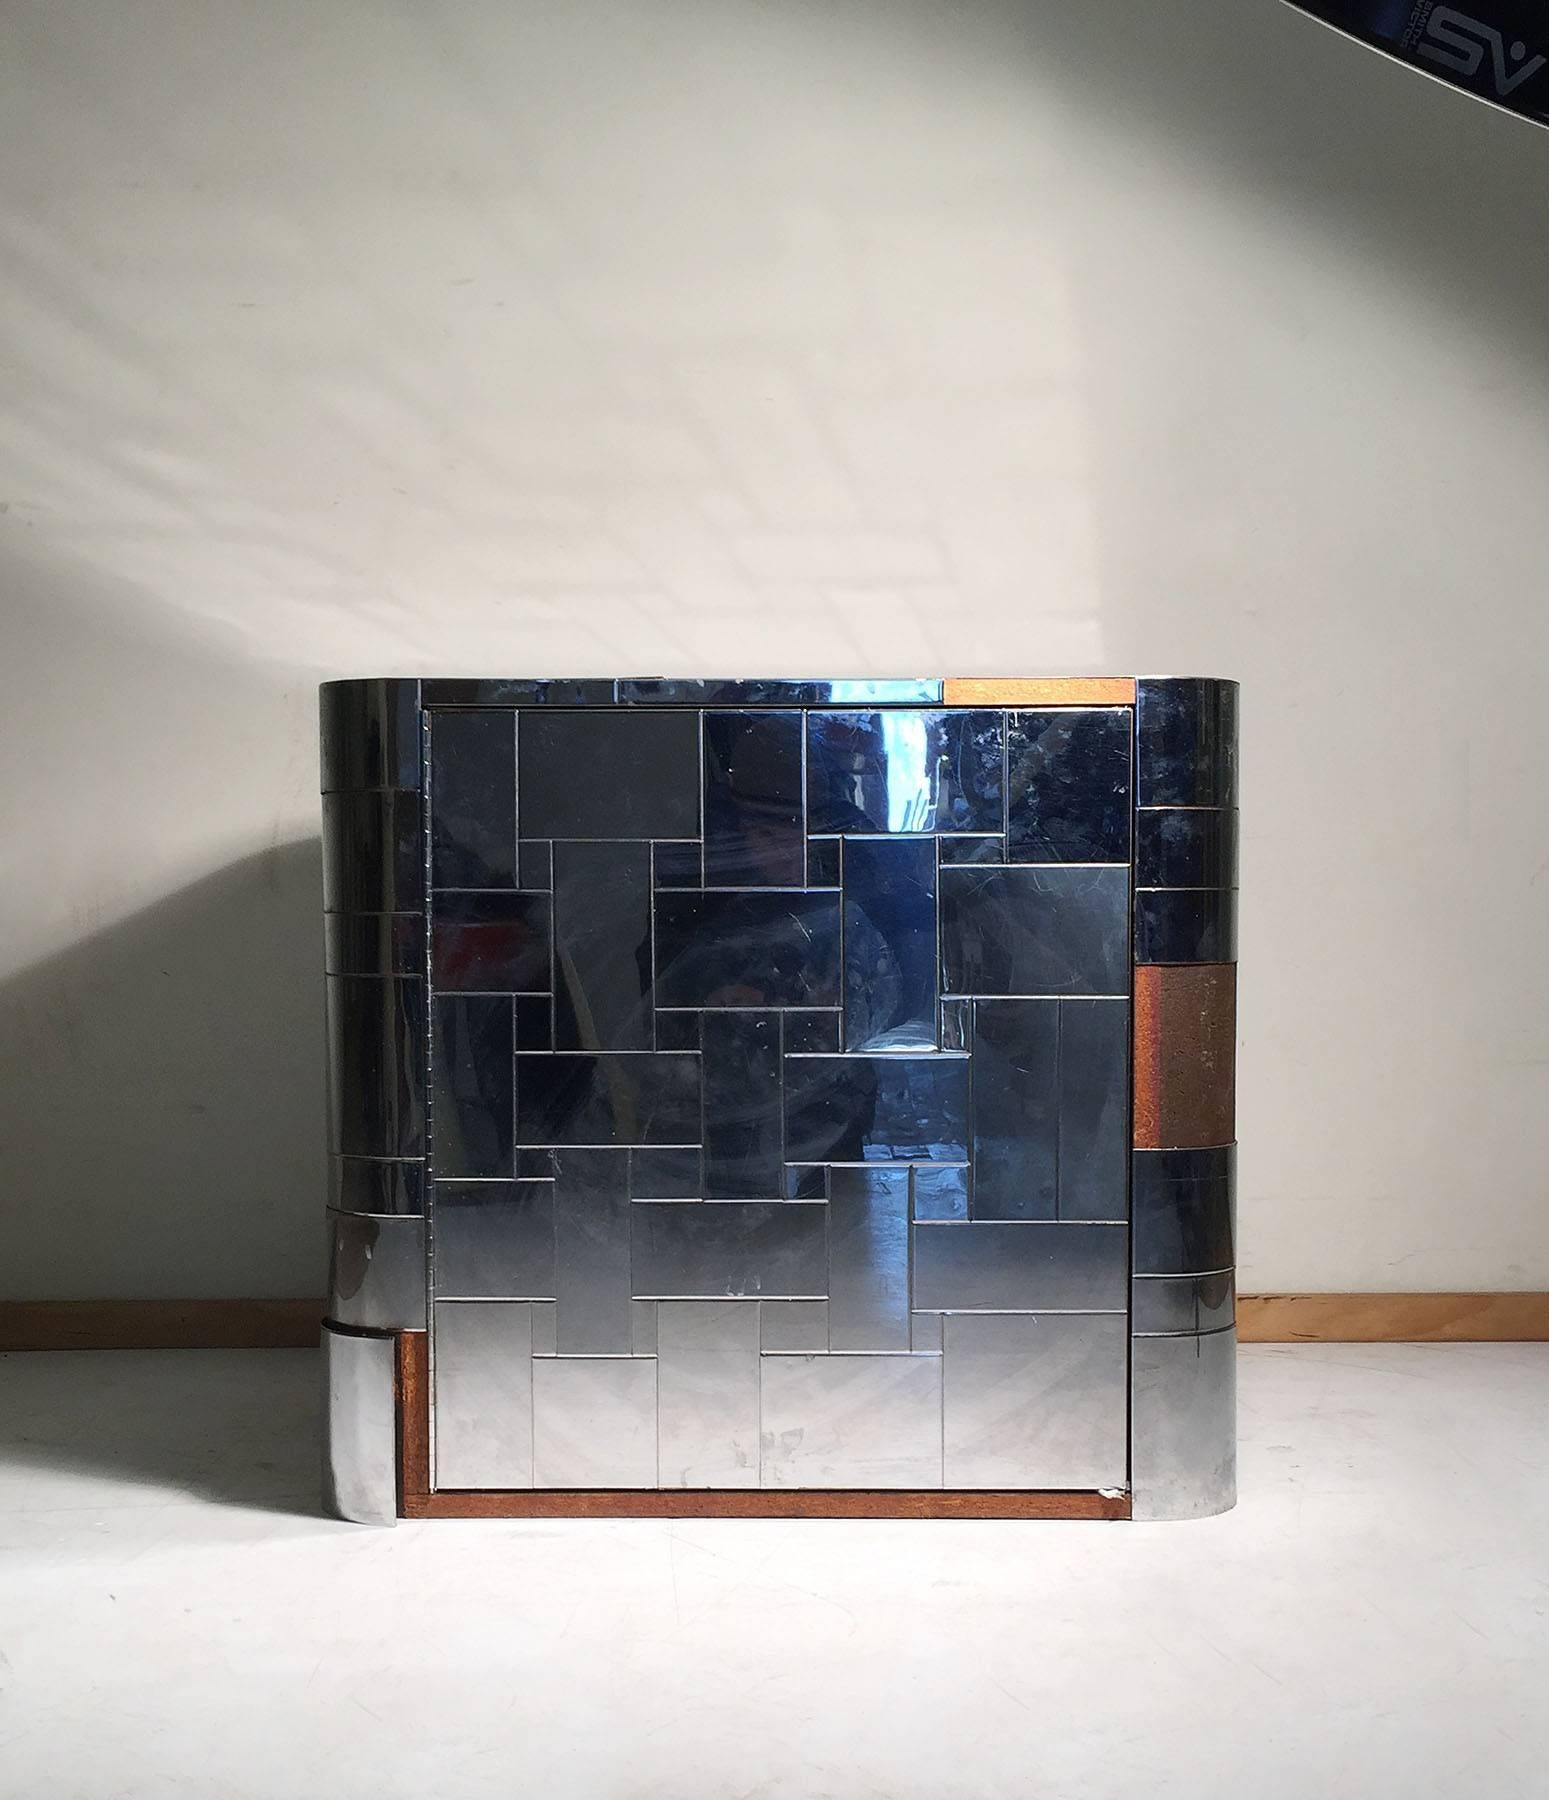 A nice Signed Paul Evans small cabinet with a floating shelf on interior. This can be used as a single End table or nightstand as well. Or can serve as a Pedestal cabinet for sculpture.  

This is an opportunity to acquire a vintage signed Paul